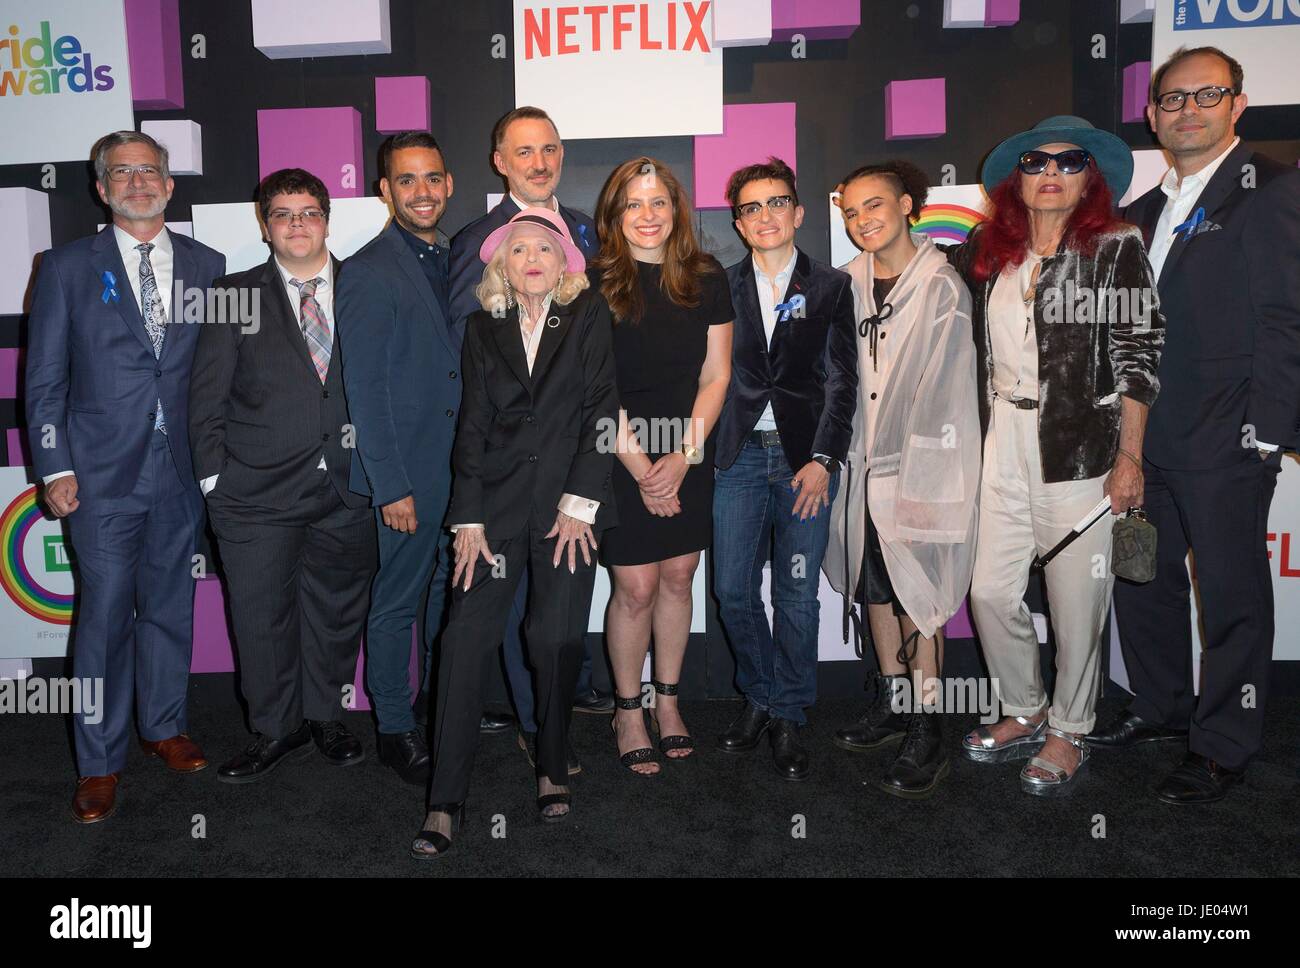 New York, NY, USA. 21st June, 2017. Peter Barbey, Gavin Grimm, guest, Stephen Mooallem, Edie Windsor, Leanne Pittsford, Masha Gessen, Tyler Ford, Patricia Field, guest at arrivals for The Village Voice Pride Awards, Capitale, New York, NY June 21, 2017. Credit: Lev Radin/Everett Collection/Alamy Live News Stock Photo